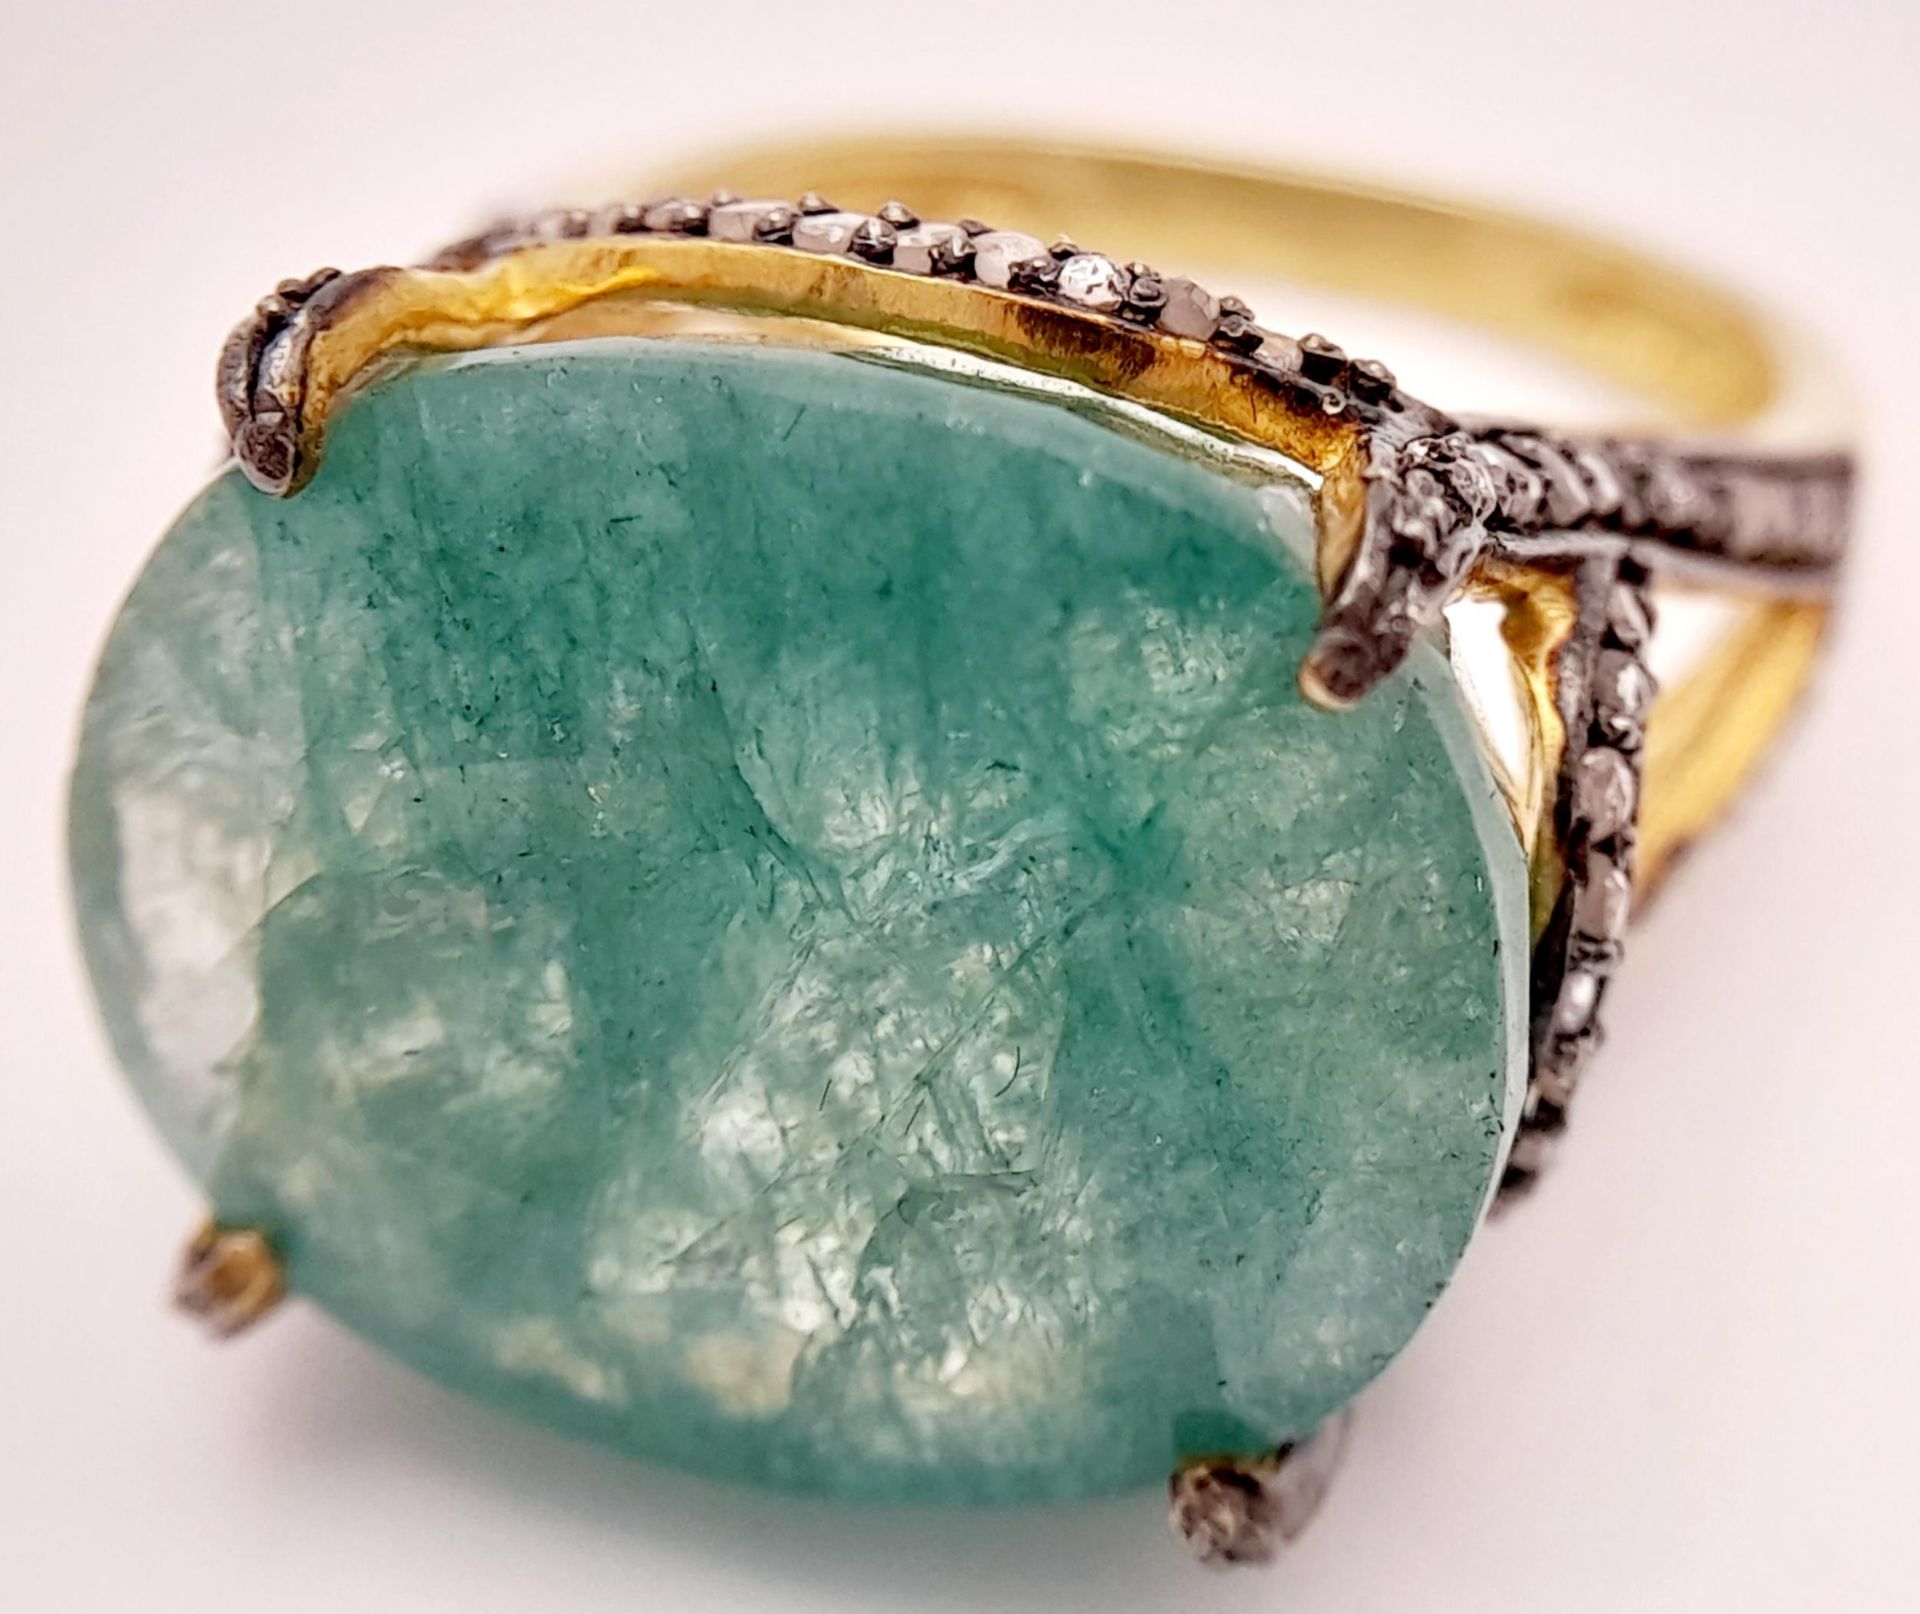 An Emerald Ring with Rose cut Diamond Accents. Set in gold plated 925 silver. Emerald - 17ct.